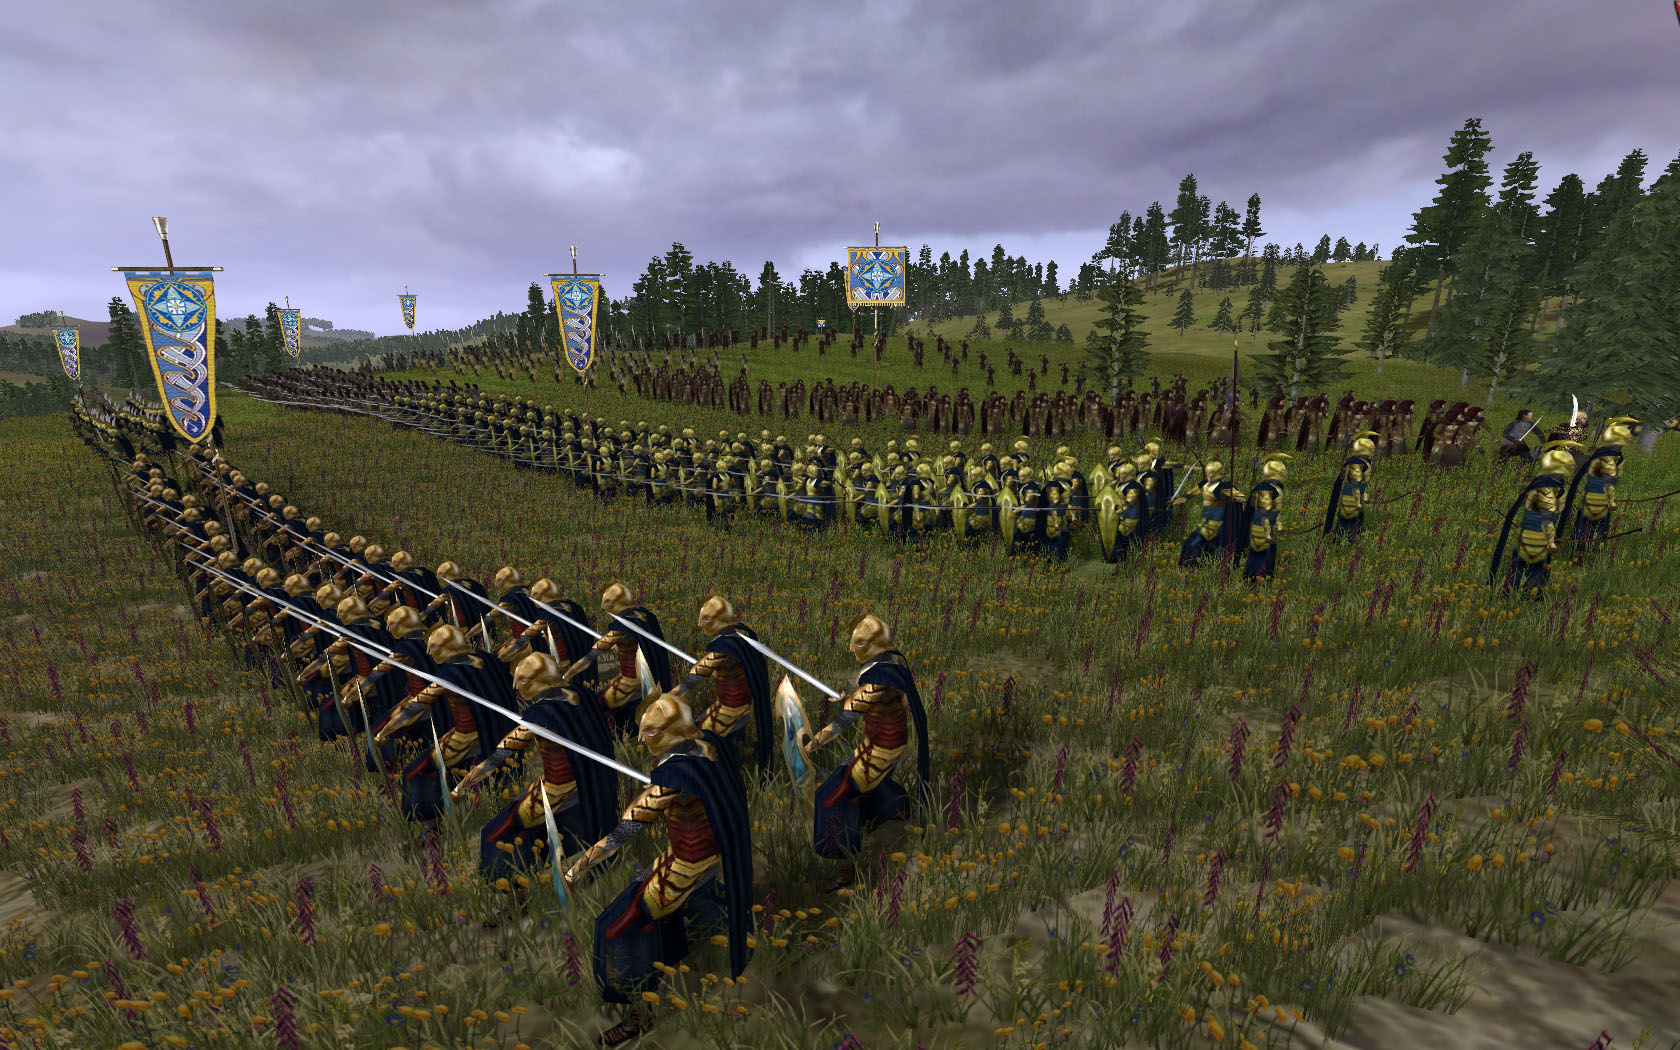 rome 2 total war campaign map